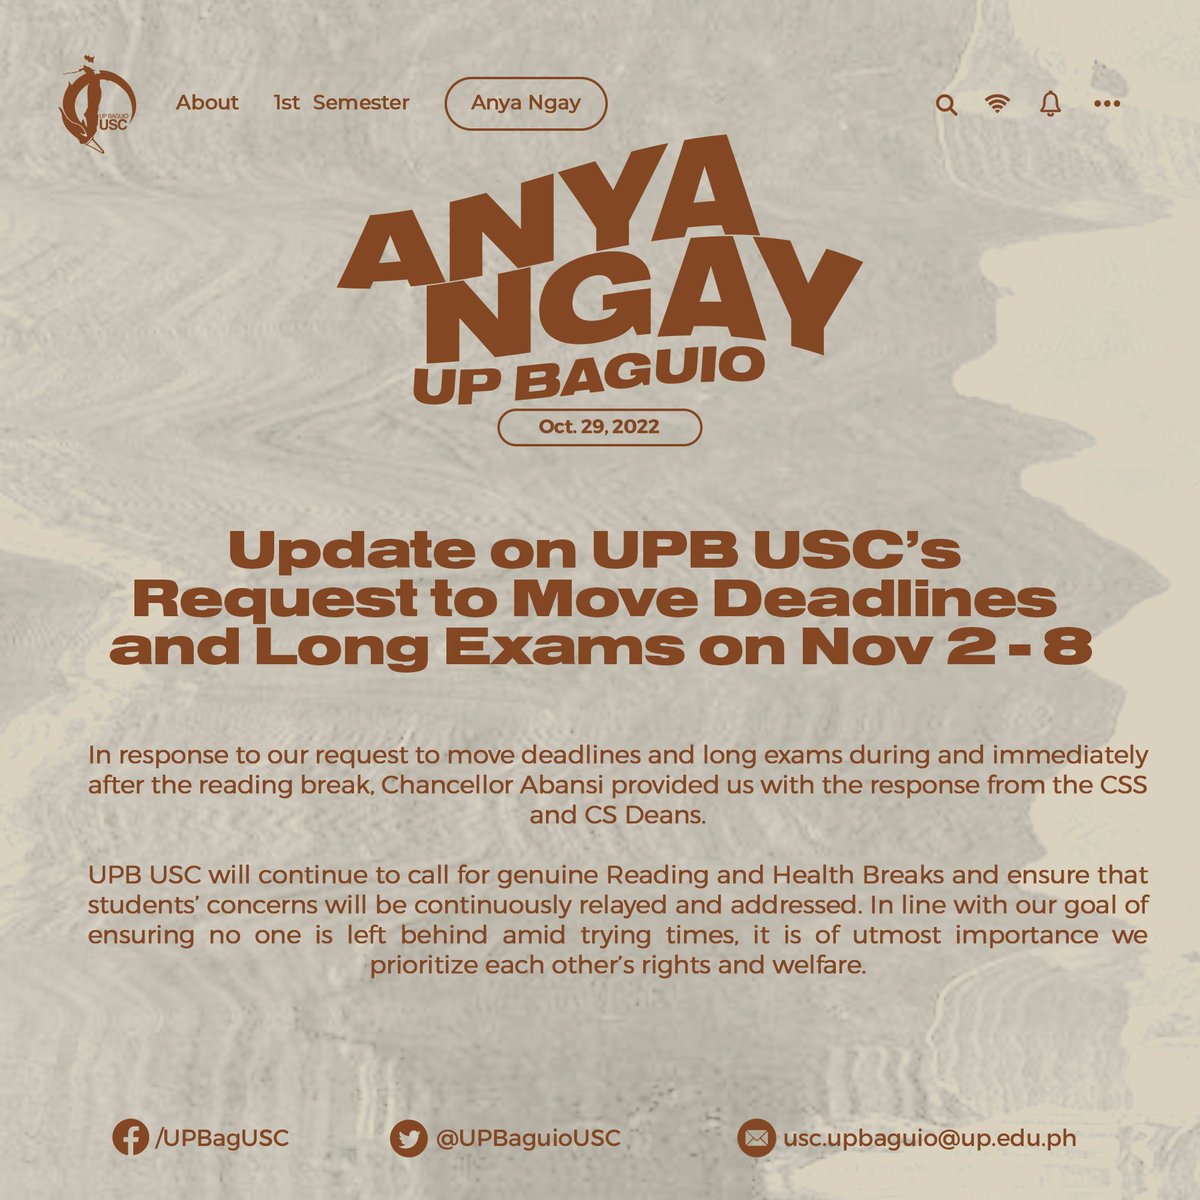 [ANYA NGAY UP BAGUIO]

In response to our request to move deadlines and long exams during and immediately after the reading break, Chancellor Abansi provided us with the response from the CSS and CS Deans. 

#WalangIwananUPB
#PaengPH